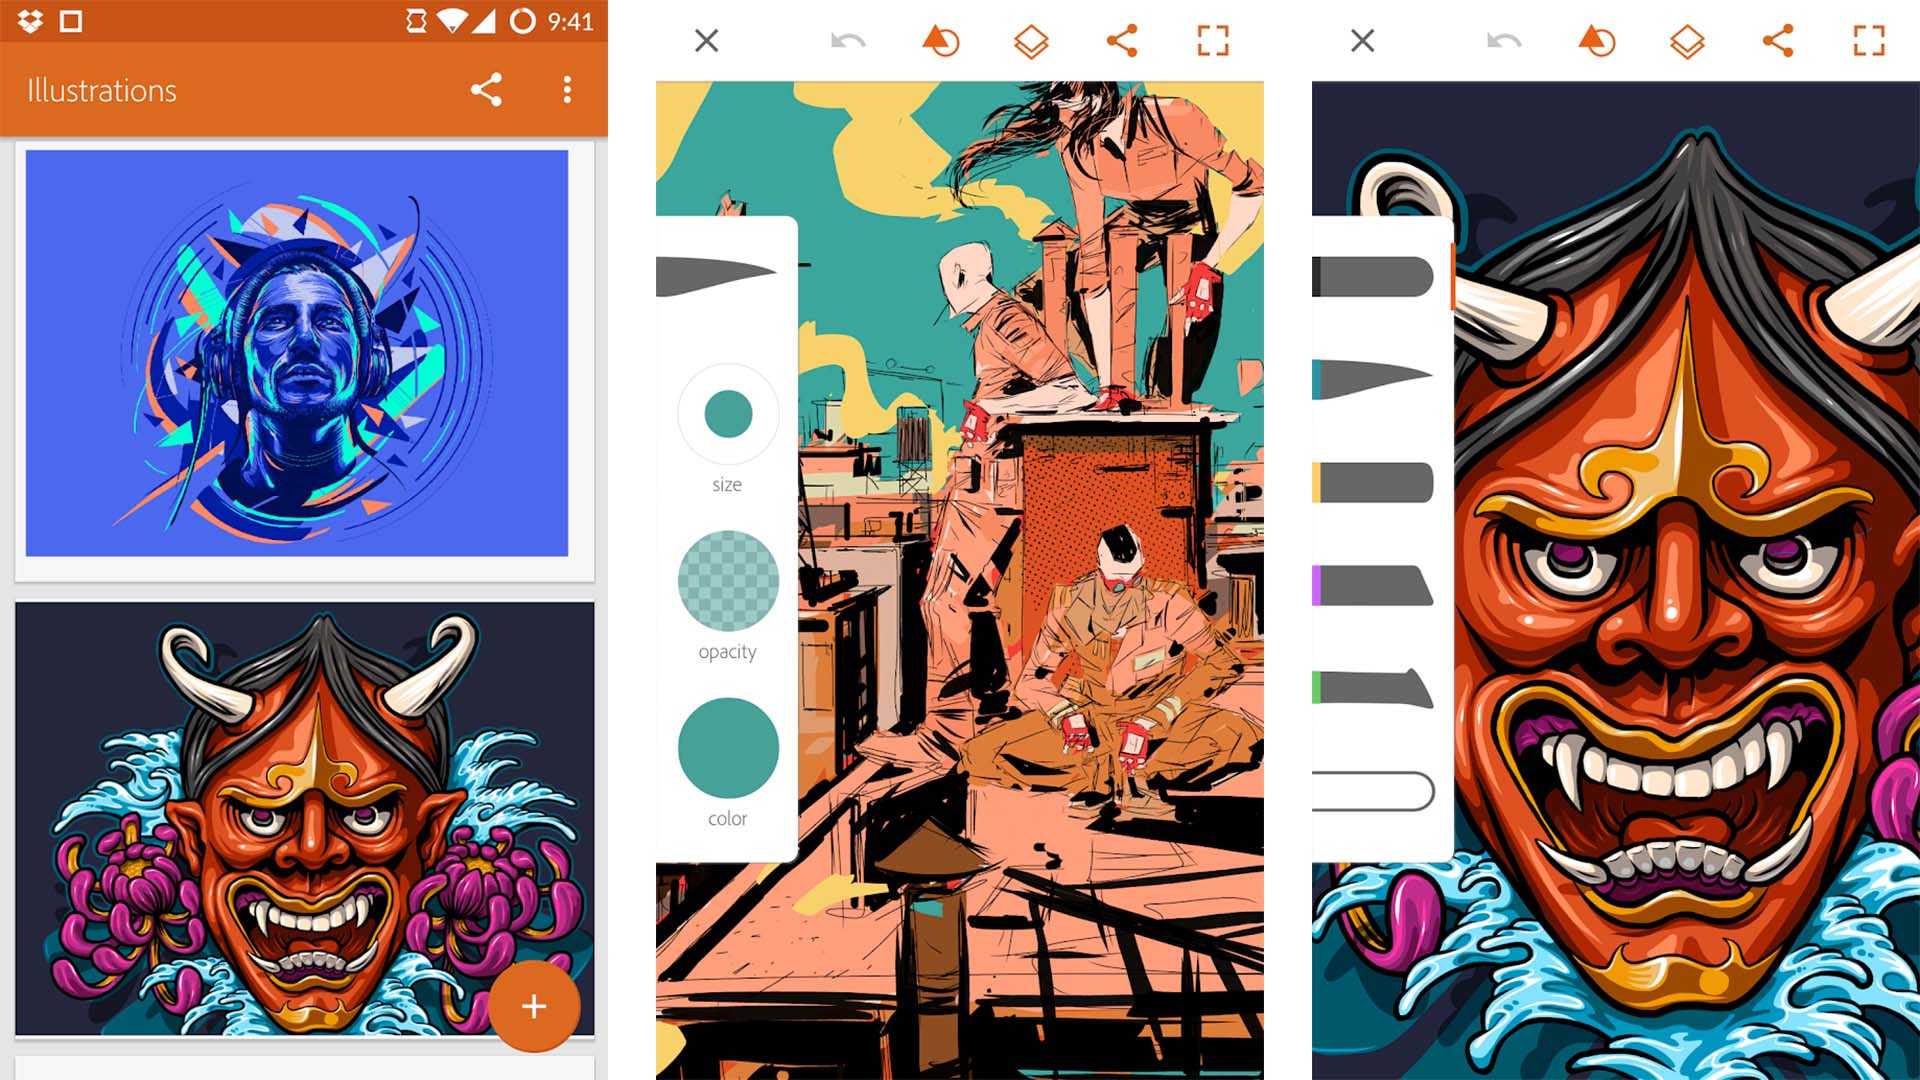 Draw it – Apps on Google Play